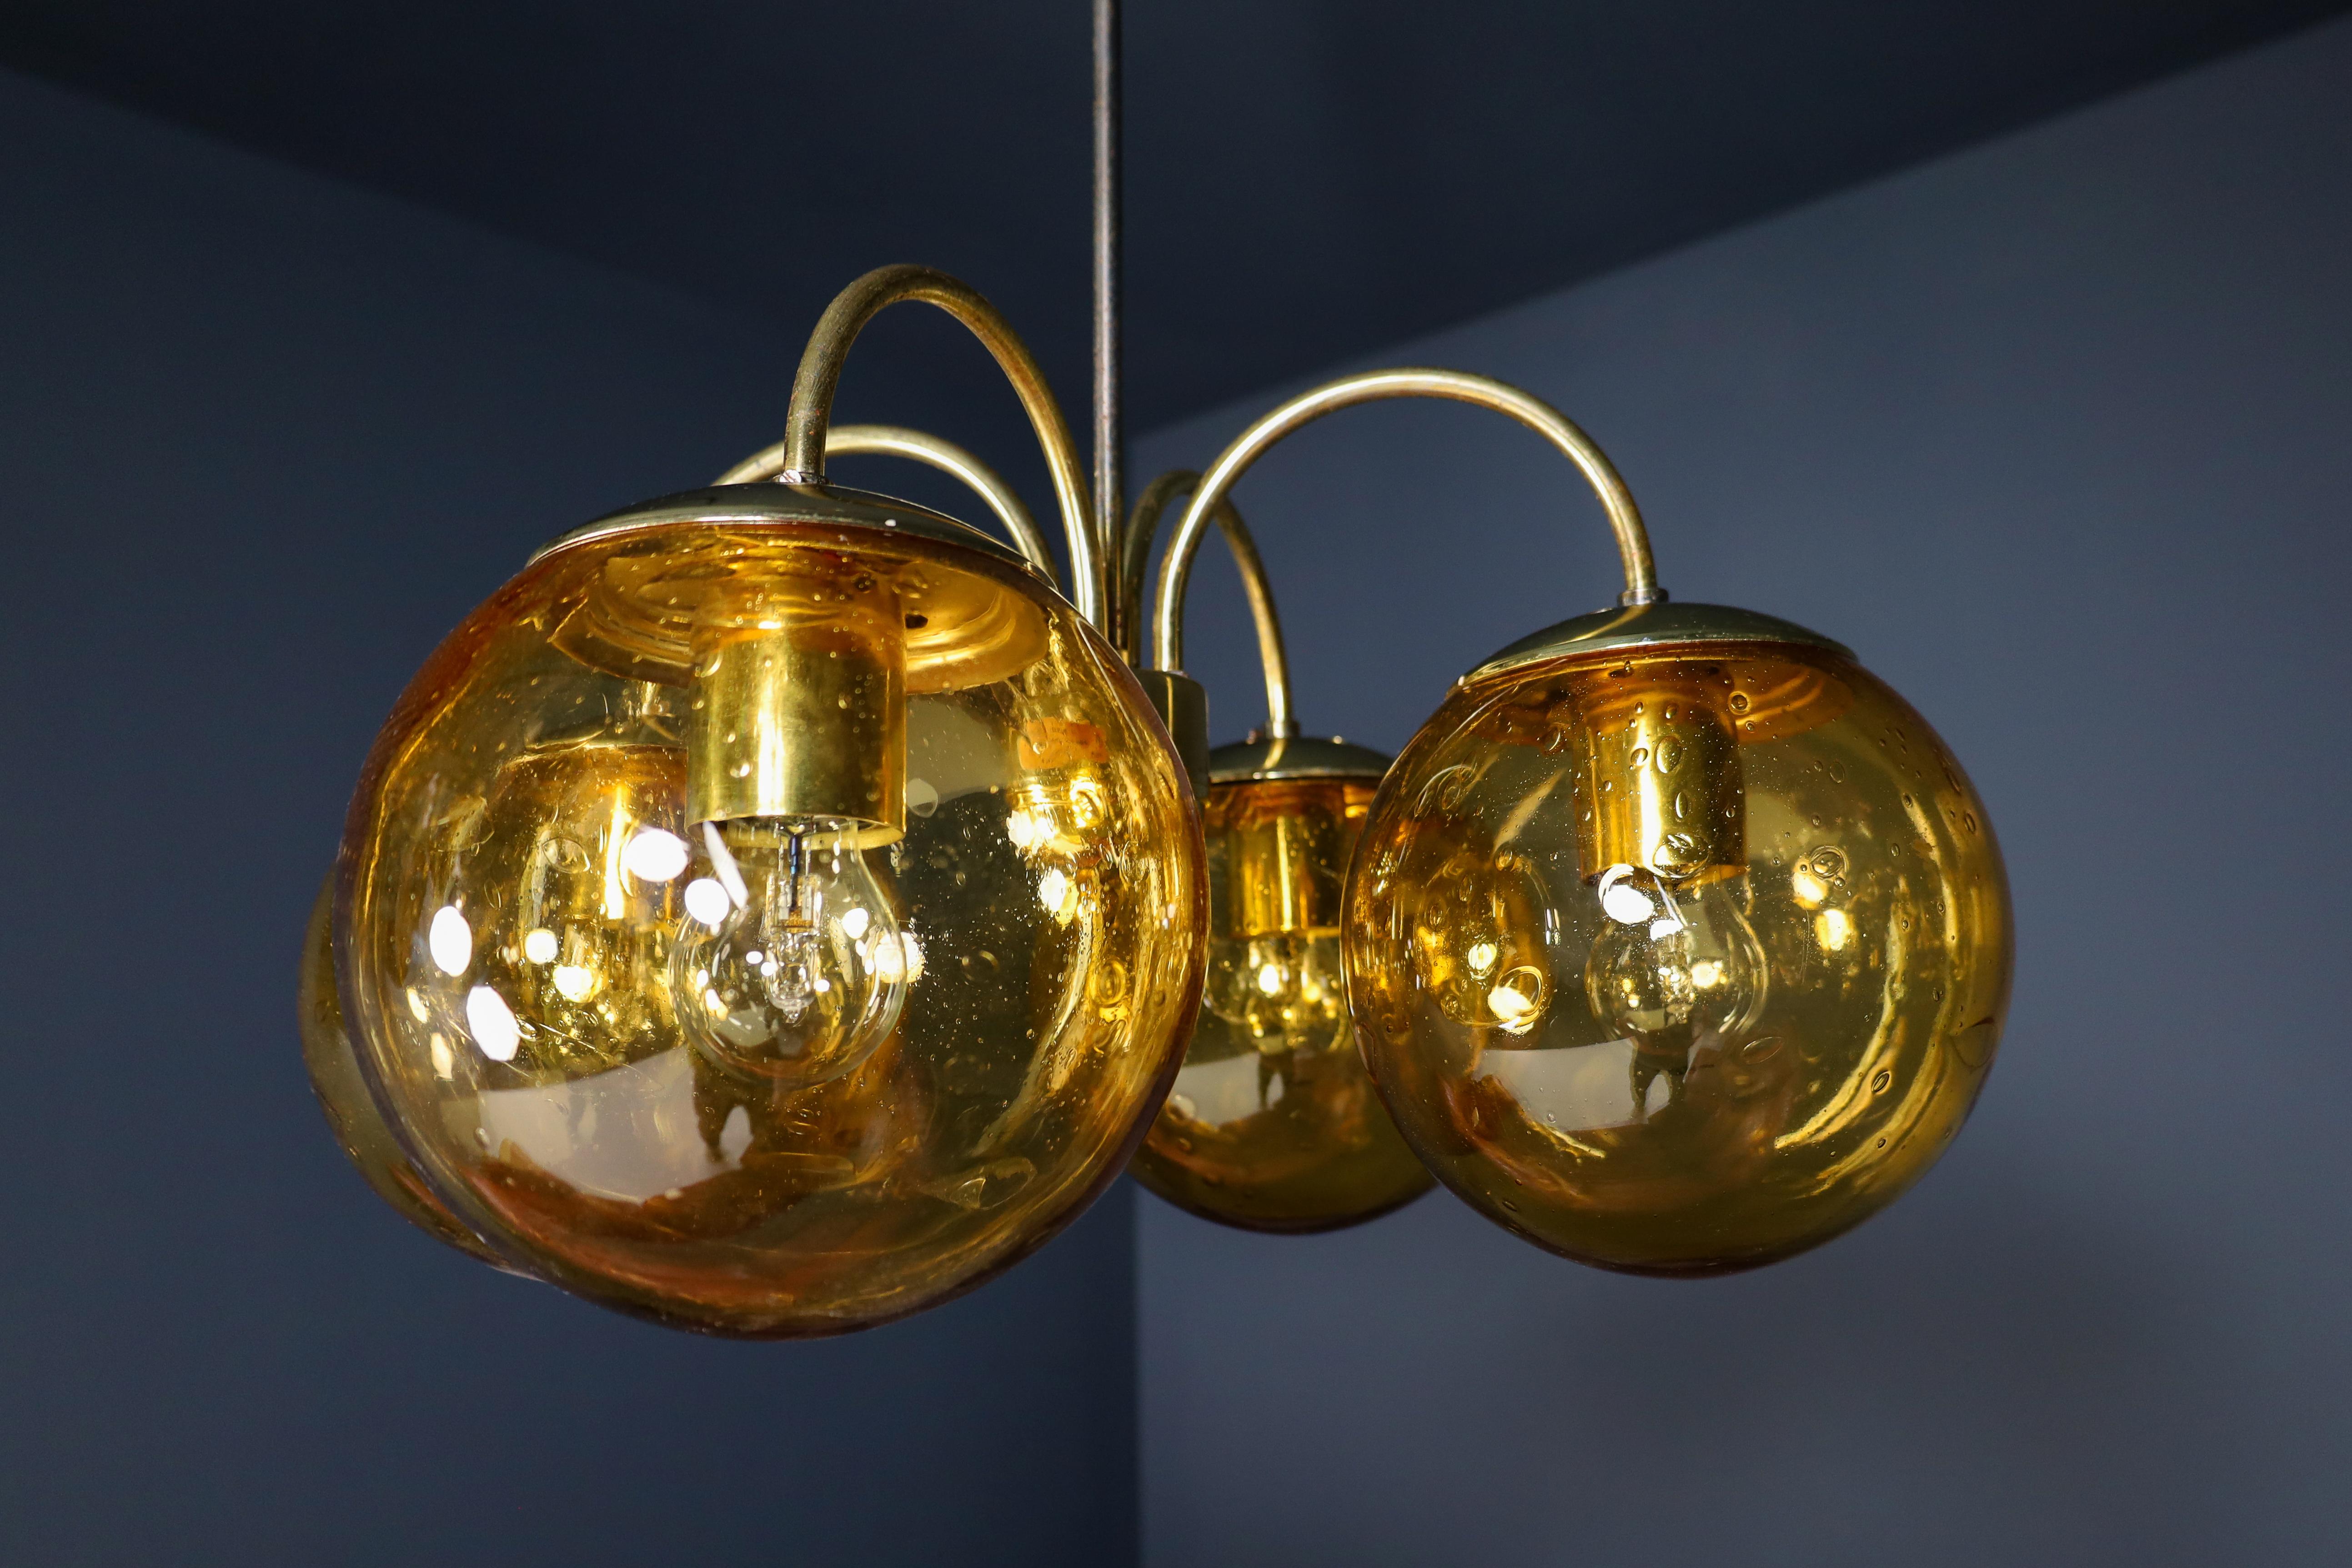 Mid-20th Century Midcentury Chandeliers in Brass and Amber-Colored Glass Czech Republic, 1960s For Sale